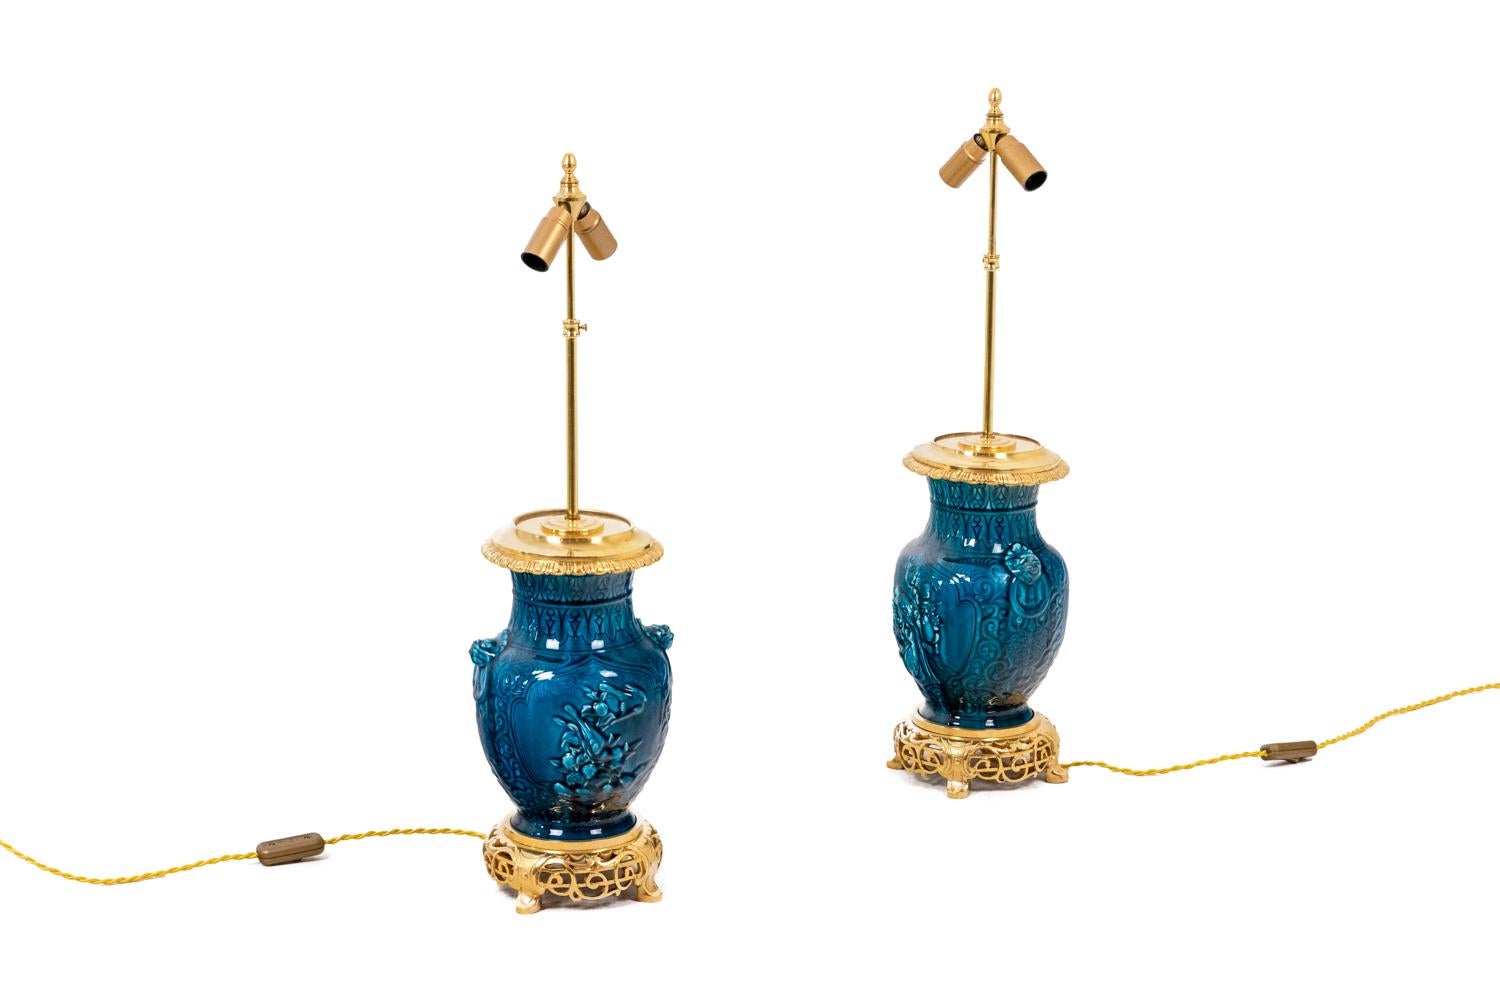 Pair of lamps inceramic and gilt bronze lamps, in blue color, adorned with leaves in relief, with aadorned ring at the top. Base in gilt bronze, chiseled and openwork adorned with interlacing. Top of the frame adorned with gadroons.

Work realized